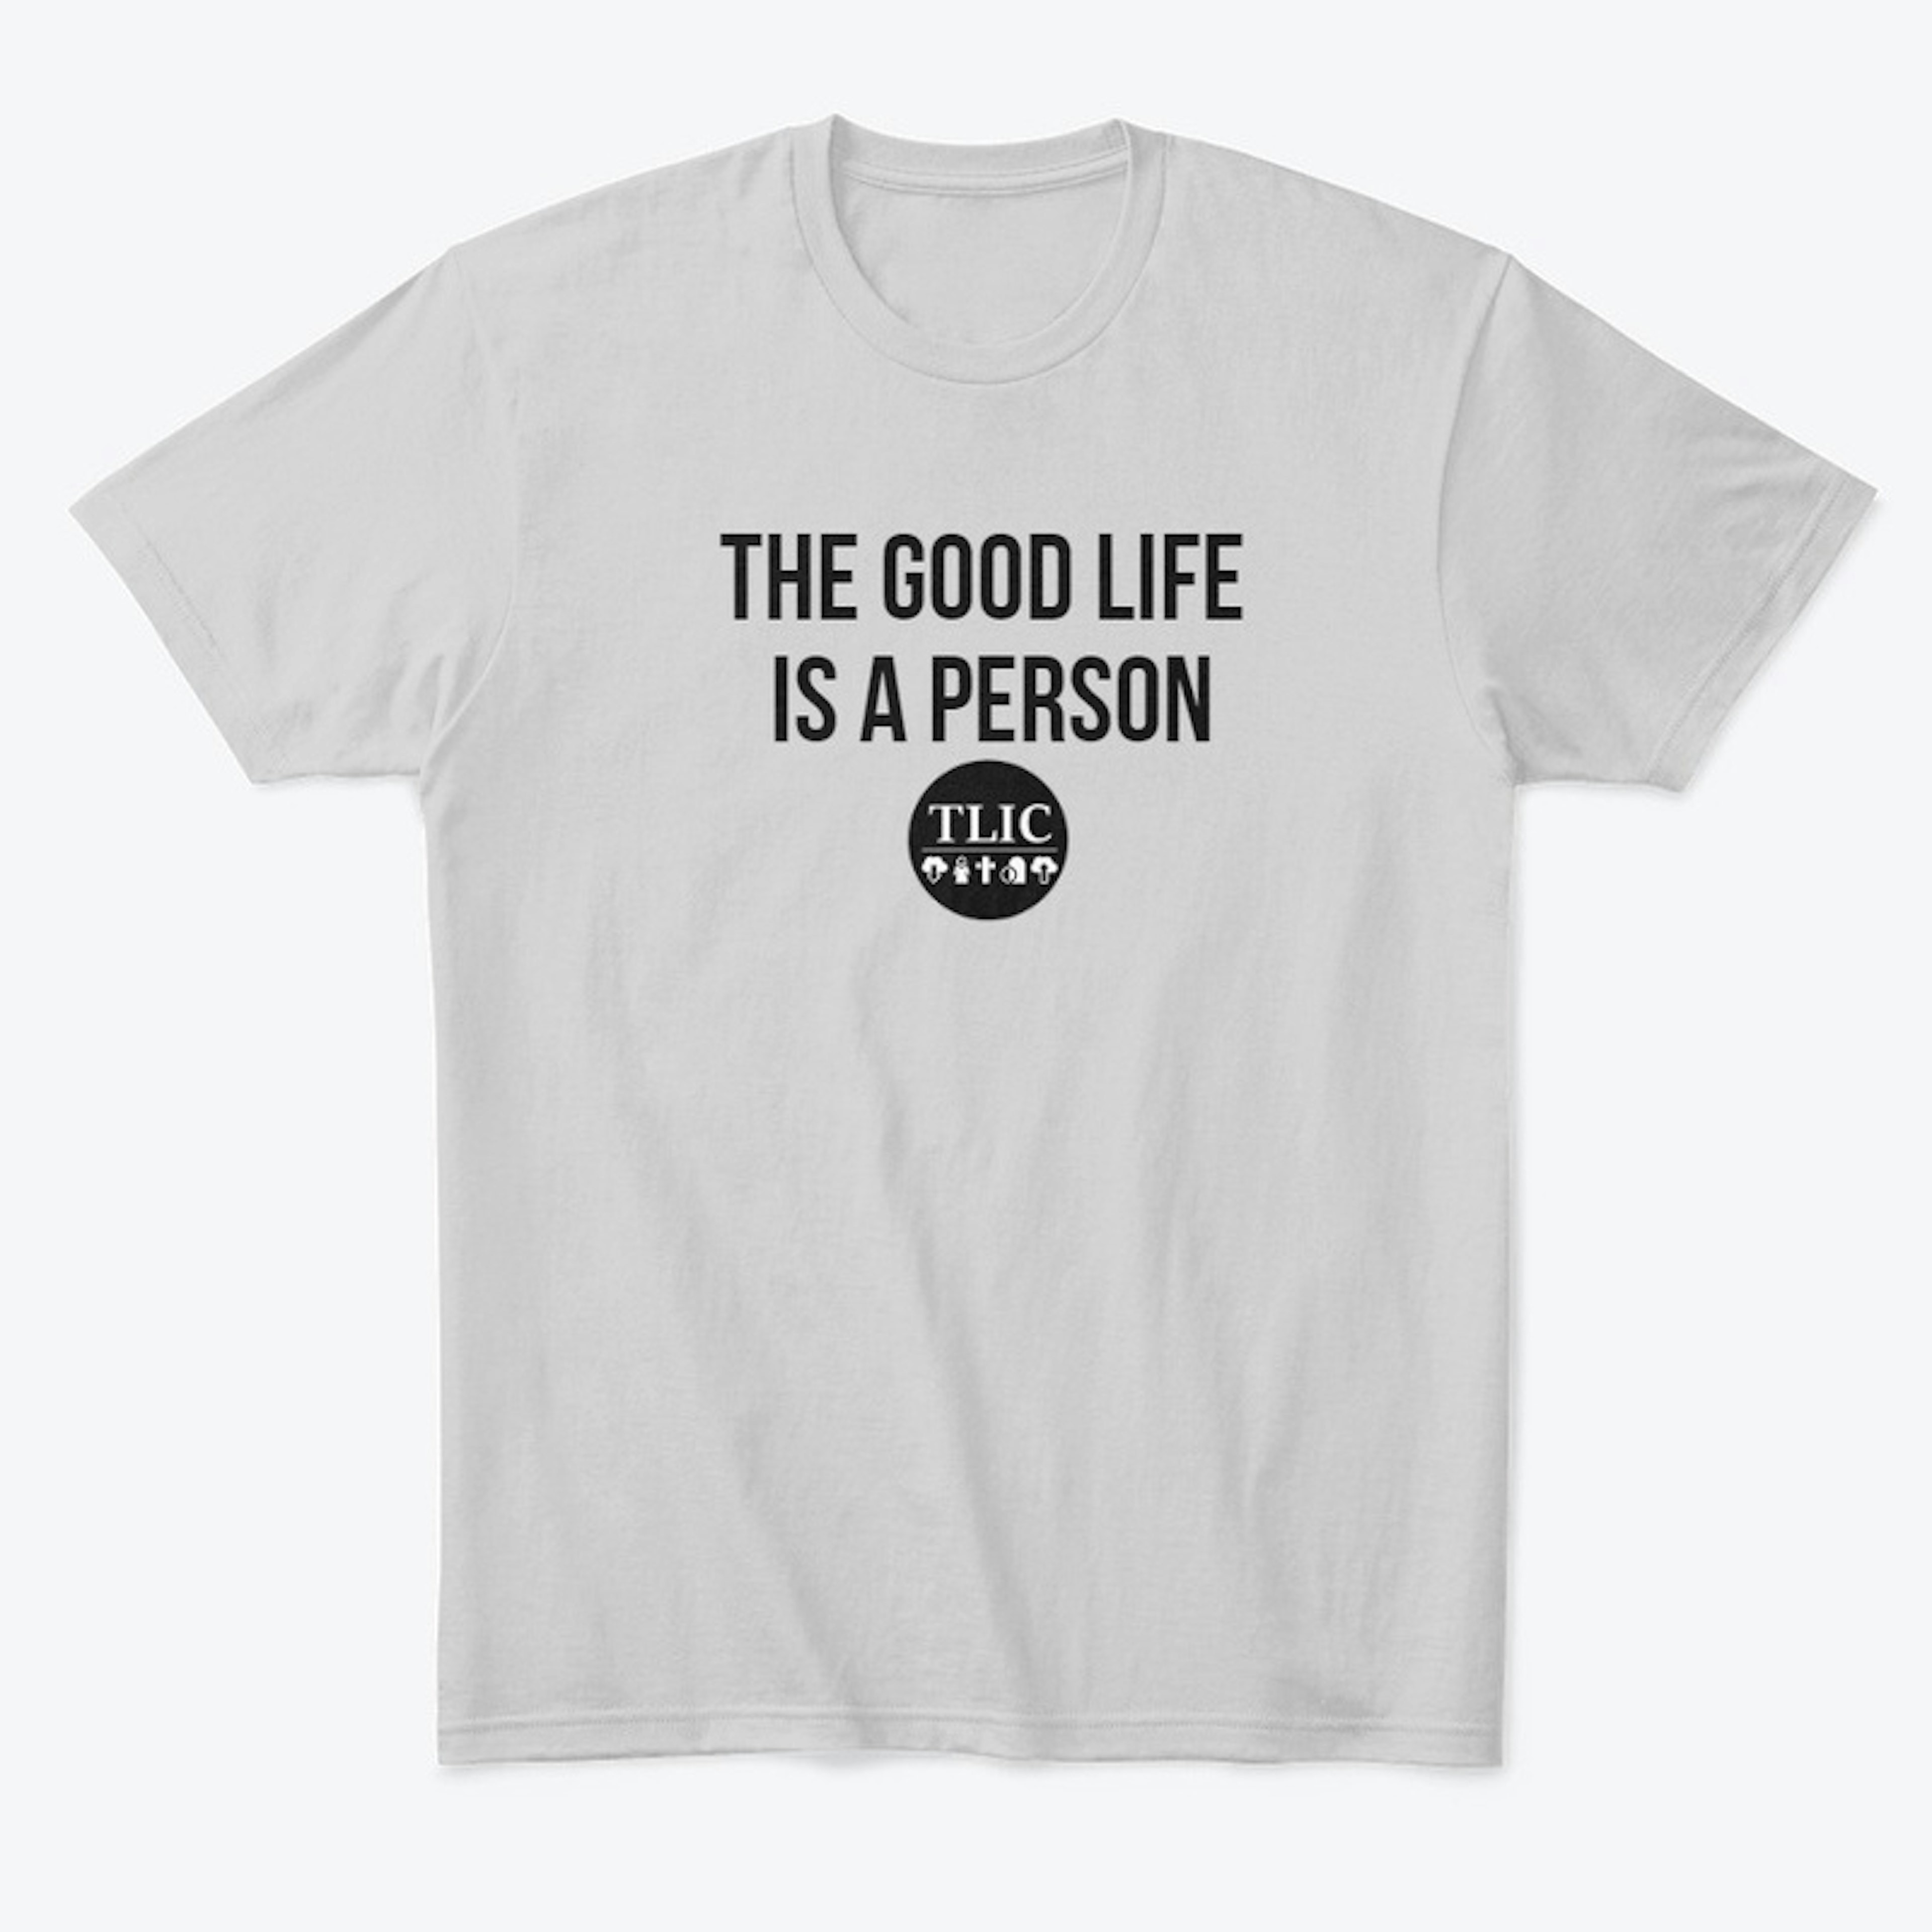 The Good Life Is A Person classic grey T